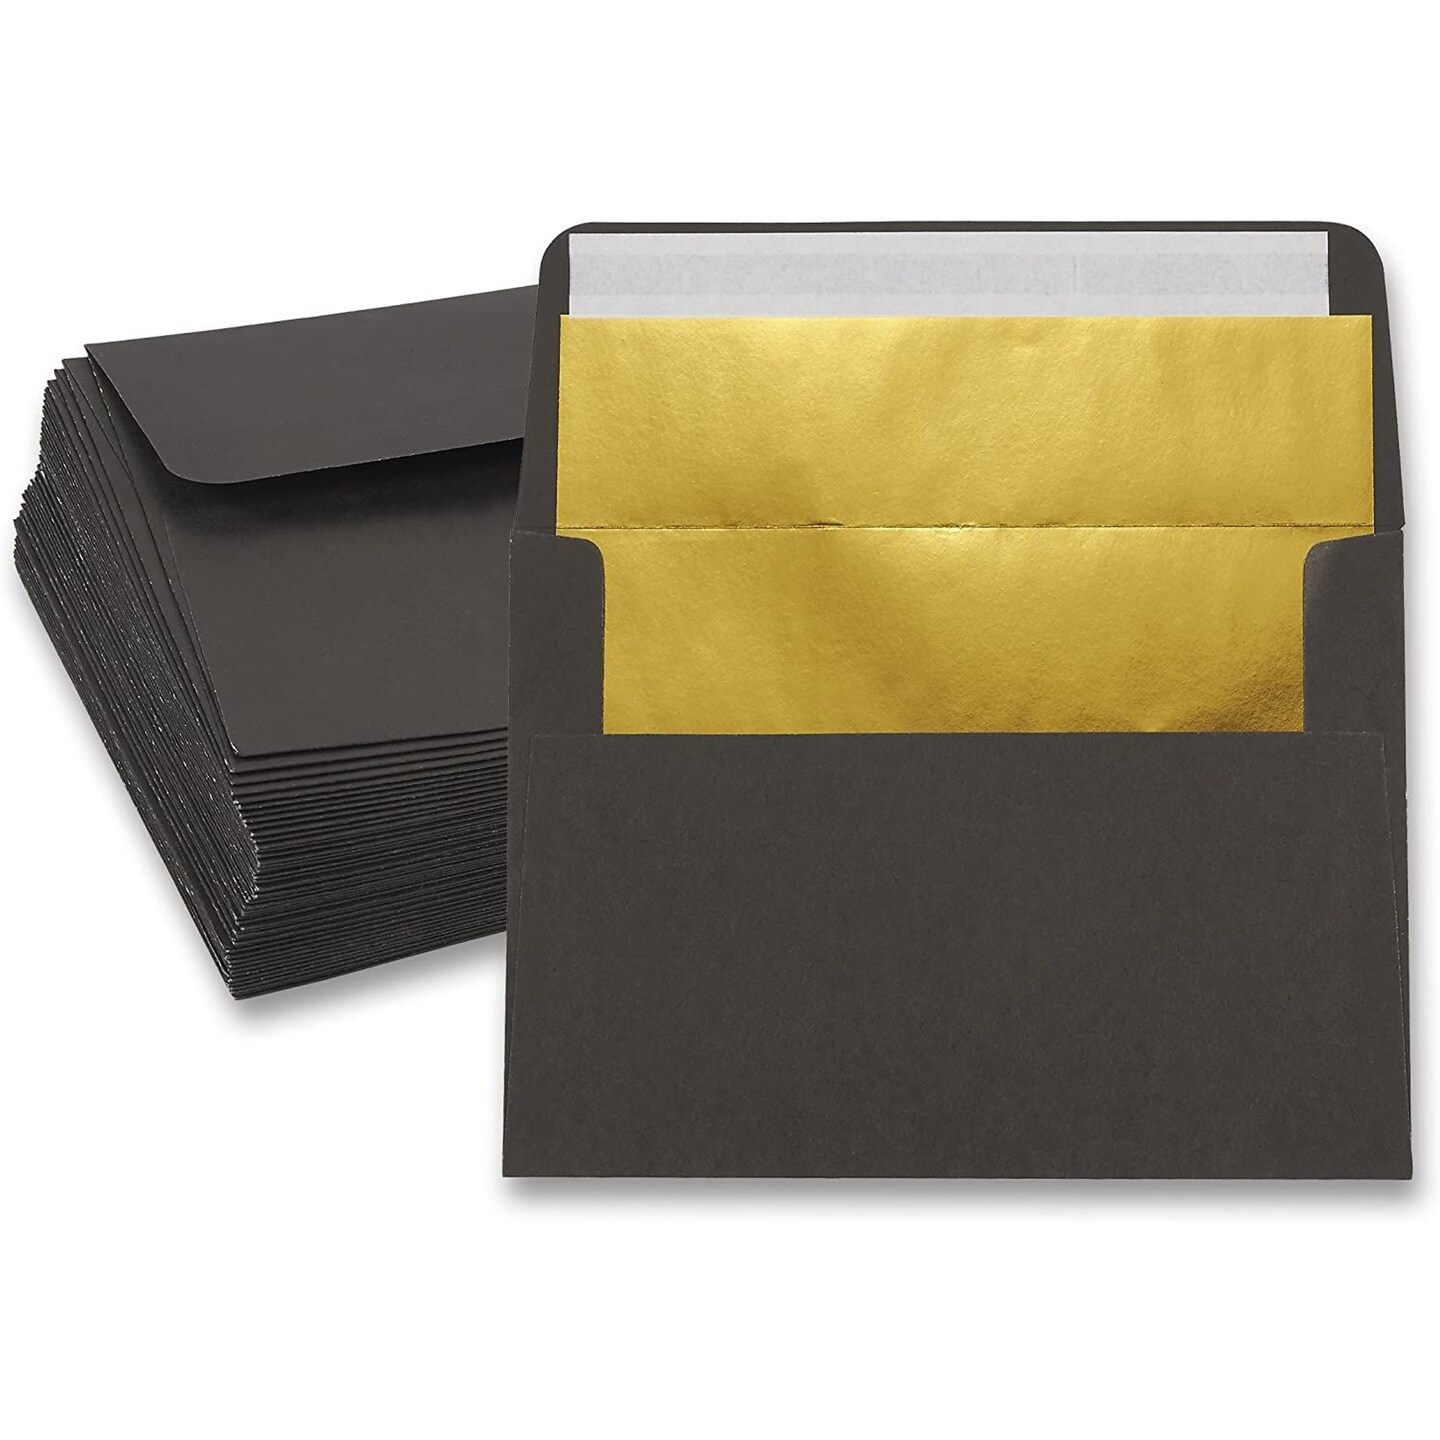 black-a7-invitations-envelopes-with-gold-foil-lining-5x7-inches-50-pack-michaels